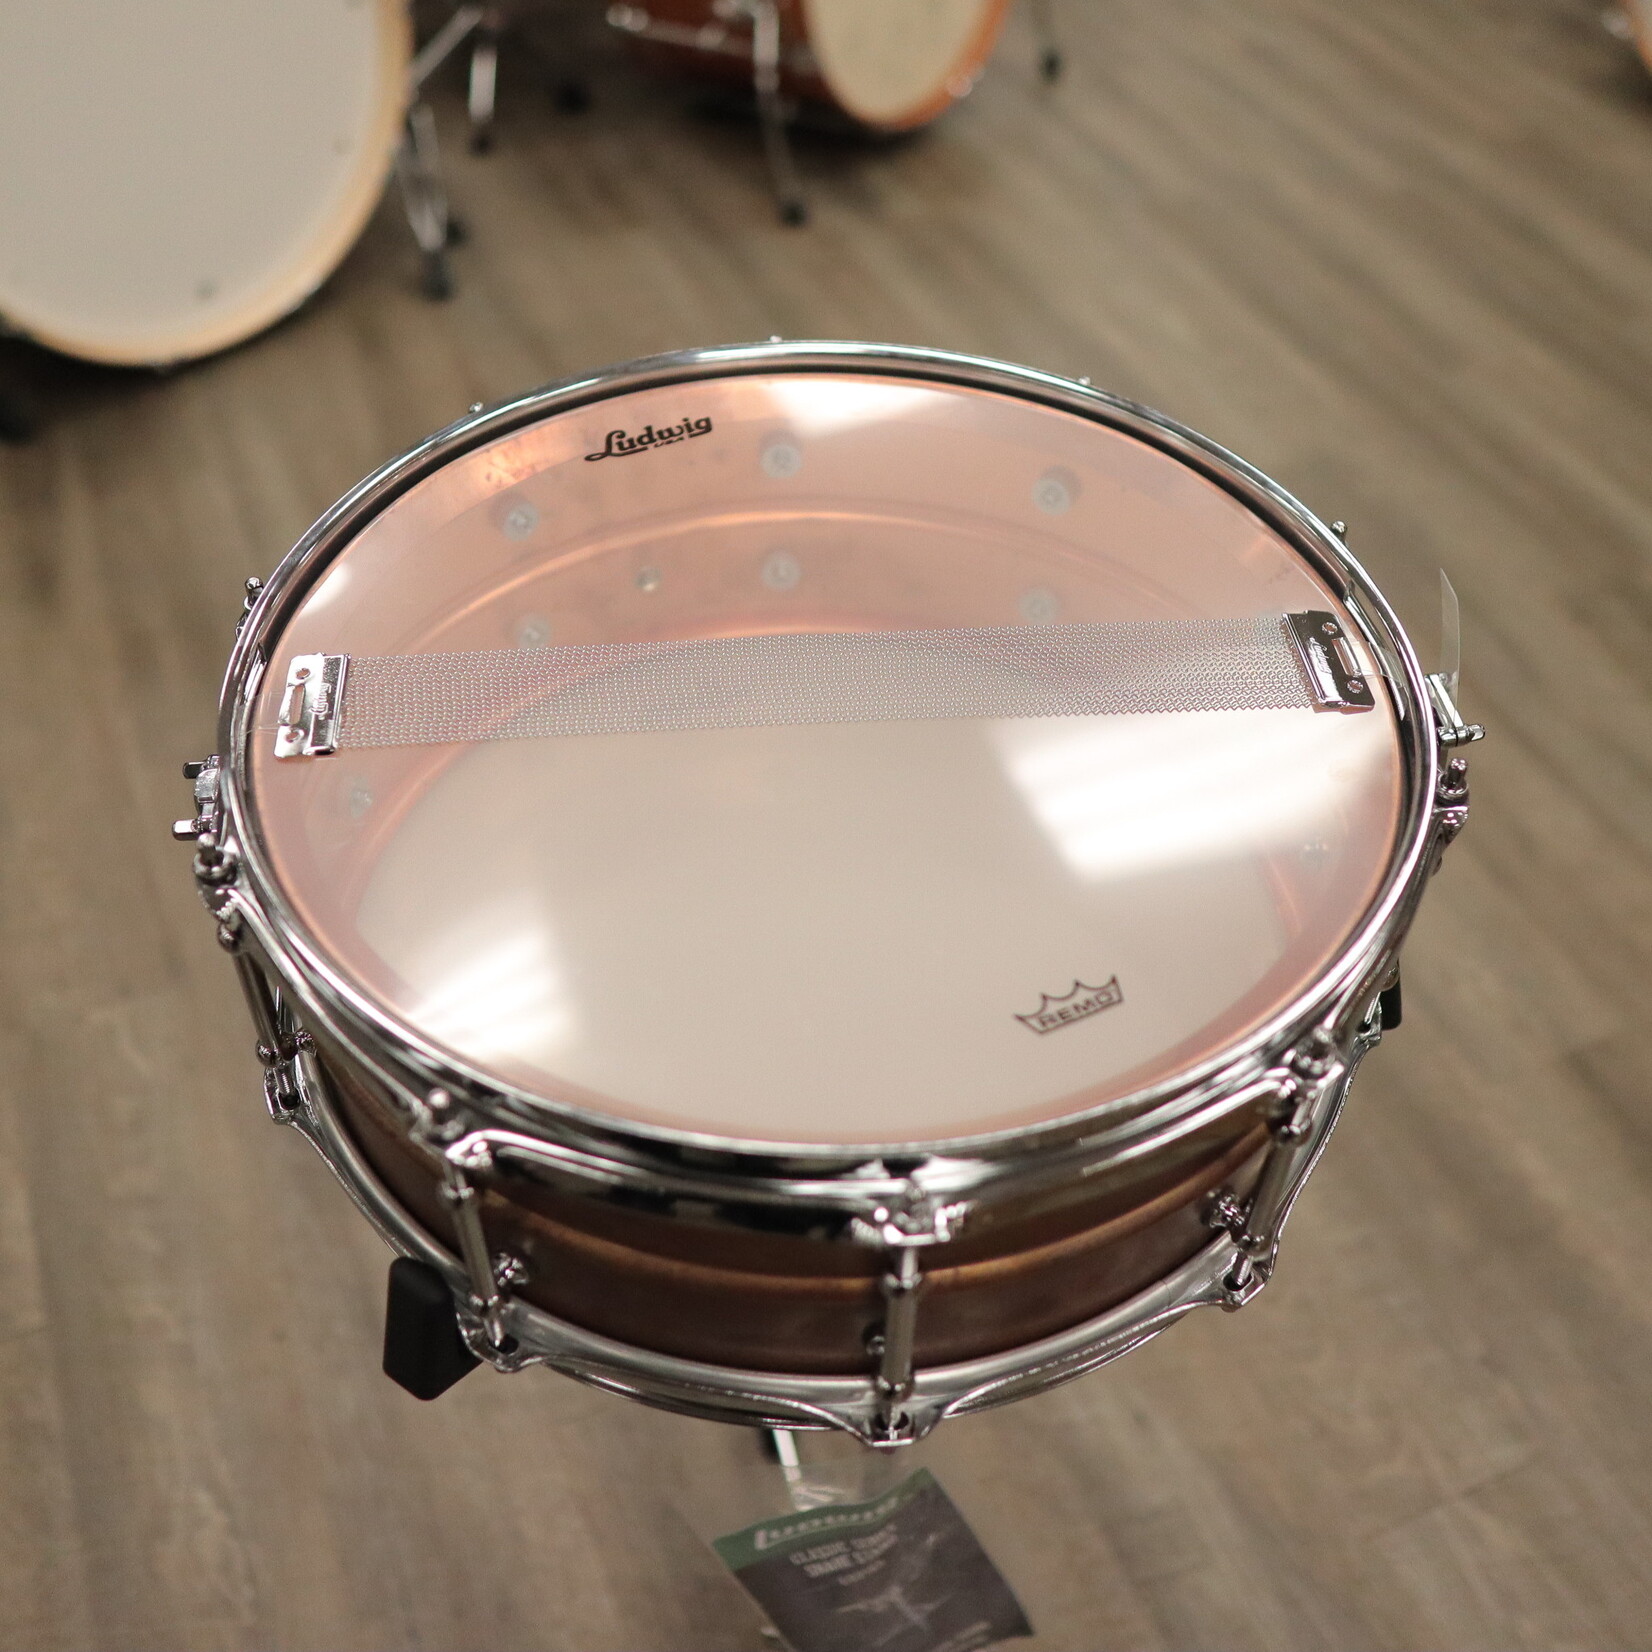 Ludwig Ludwig 5x14" Raw Copperphonic Snare Drum with Tube Lugs LC661T